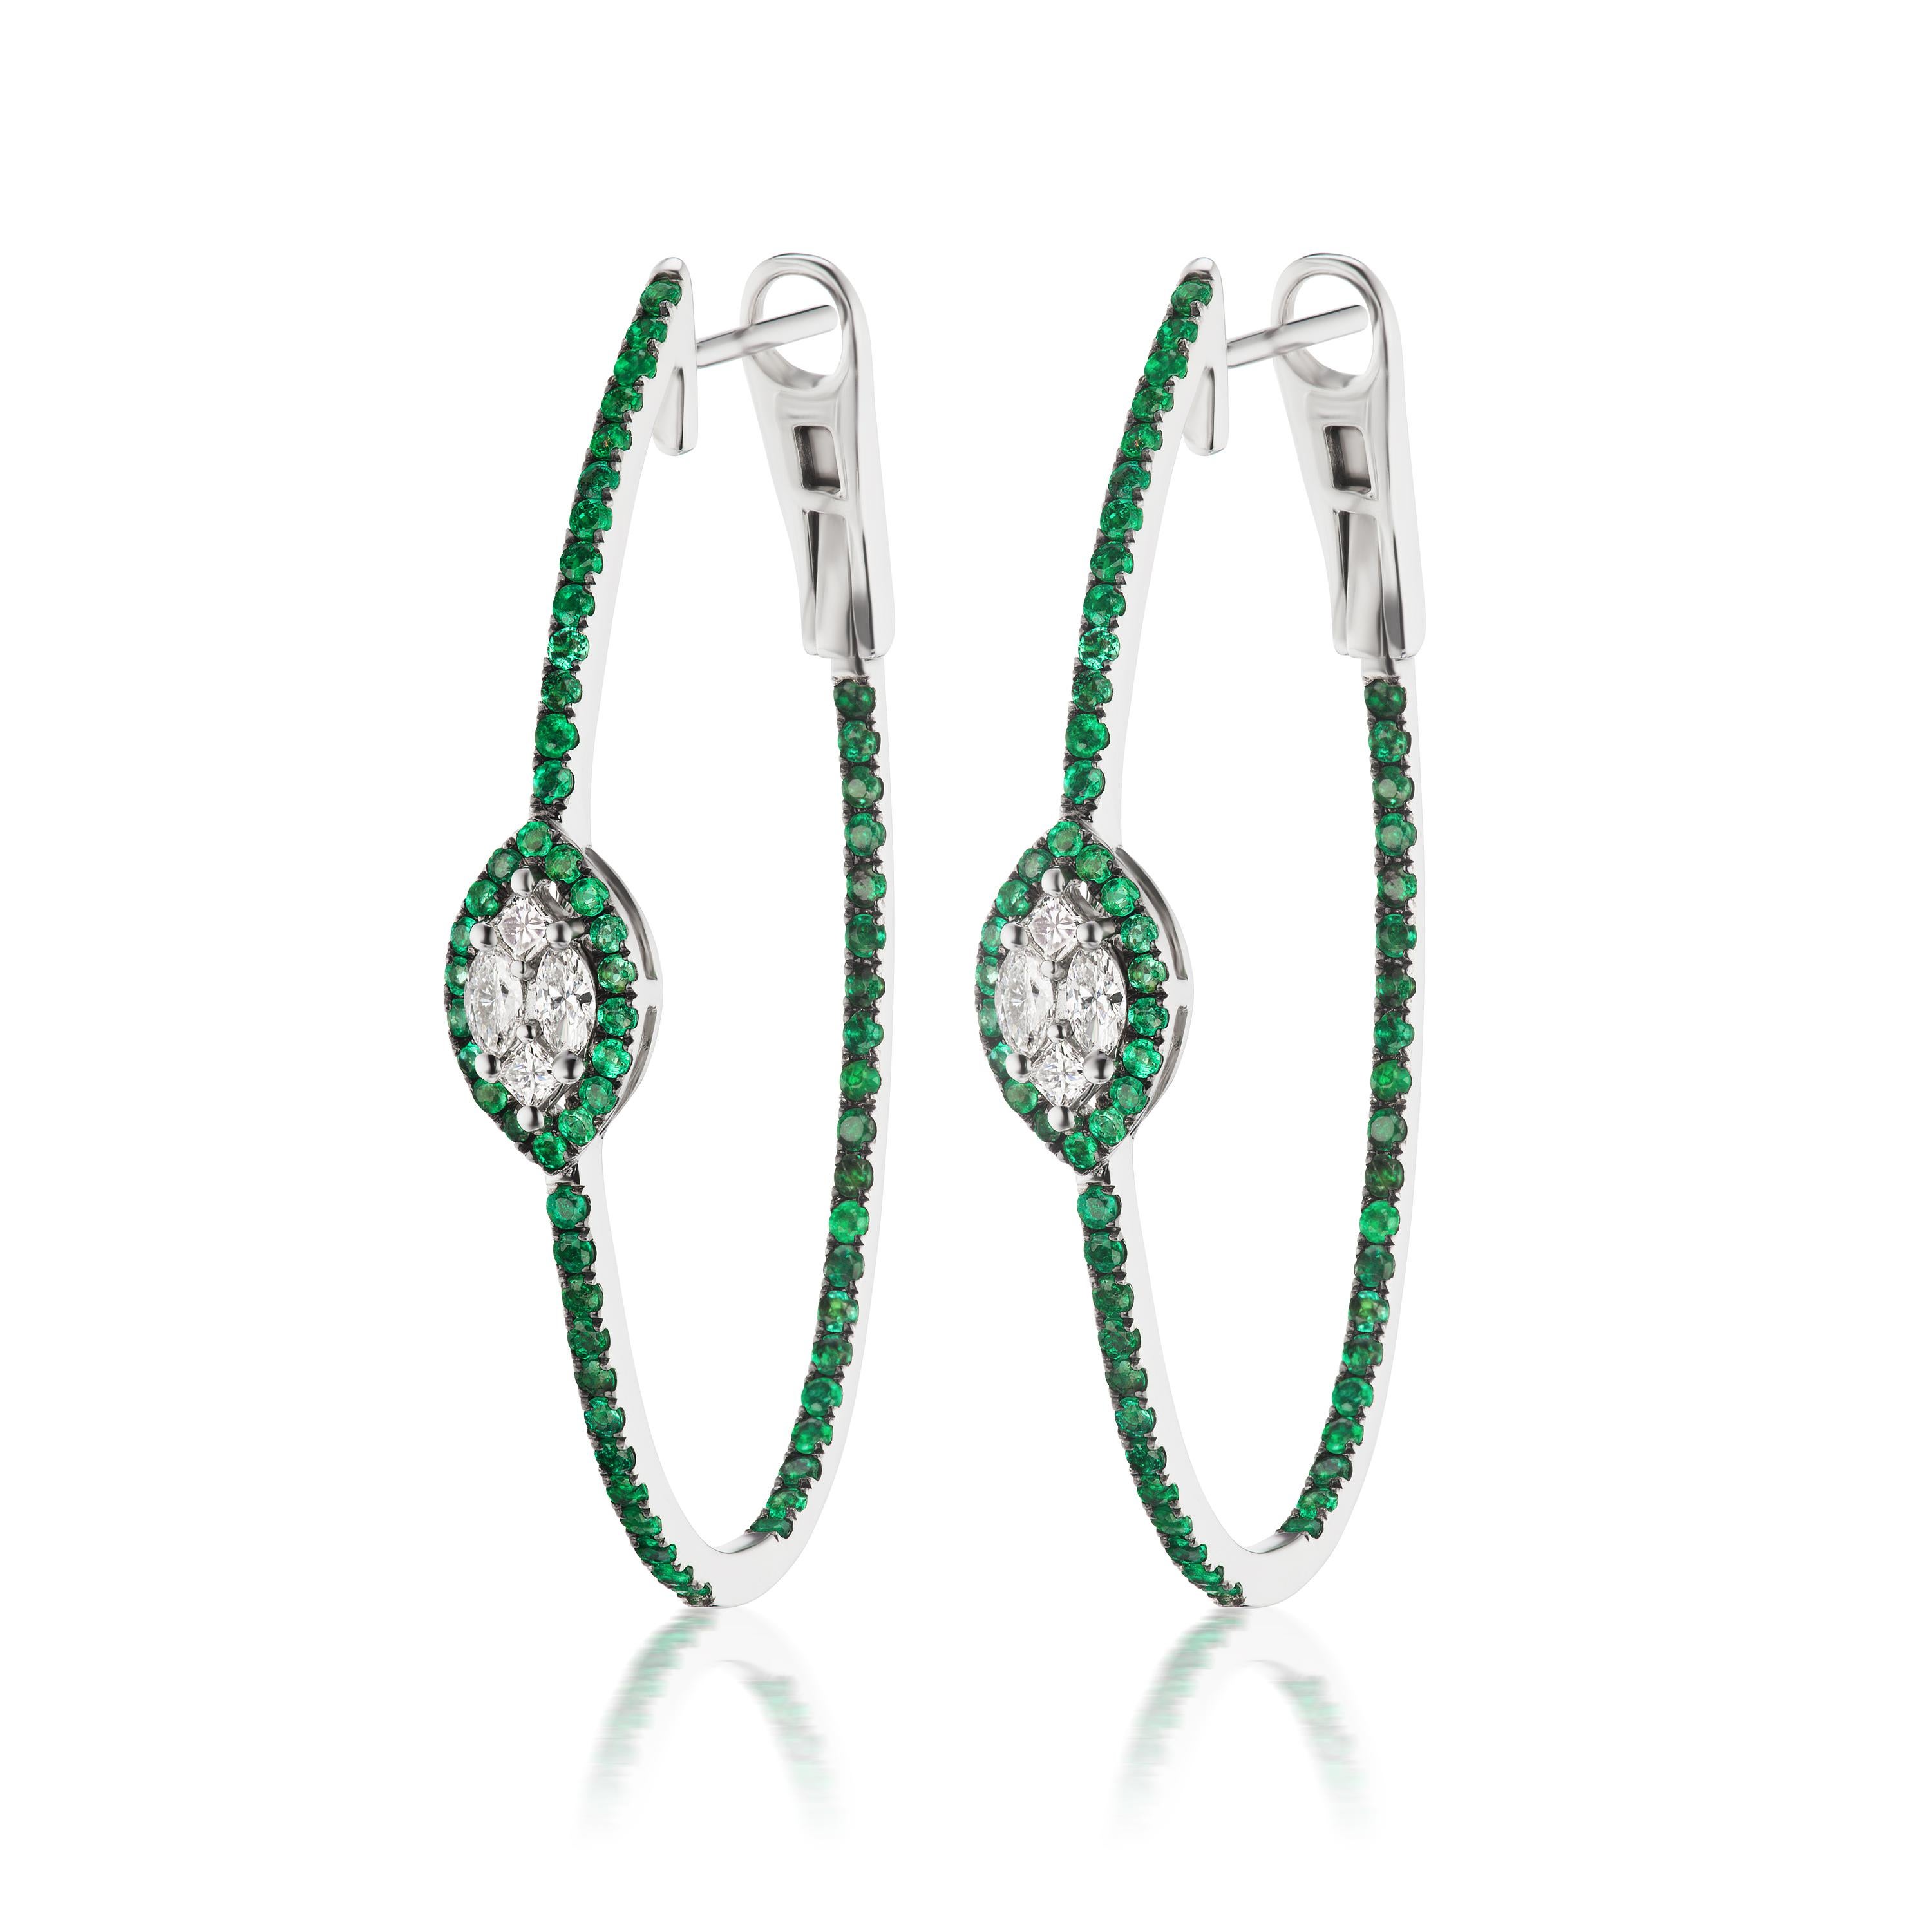 A glamorous fusion of emeralds and diamonds. This inside-out hoop earring features a marquise motif of diamonds accentuated by a halo of emeralds around it. Pave emeralds are studded inside-out of this hoop earring to give it a mesmerizing look. 